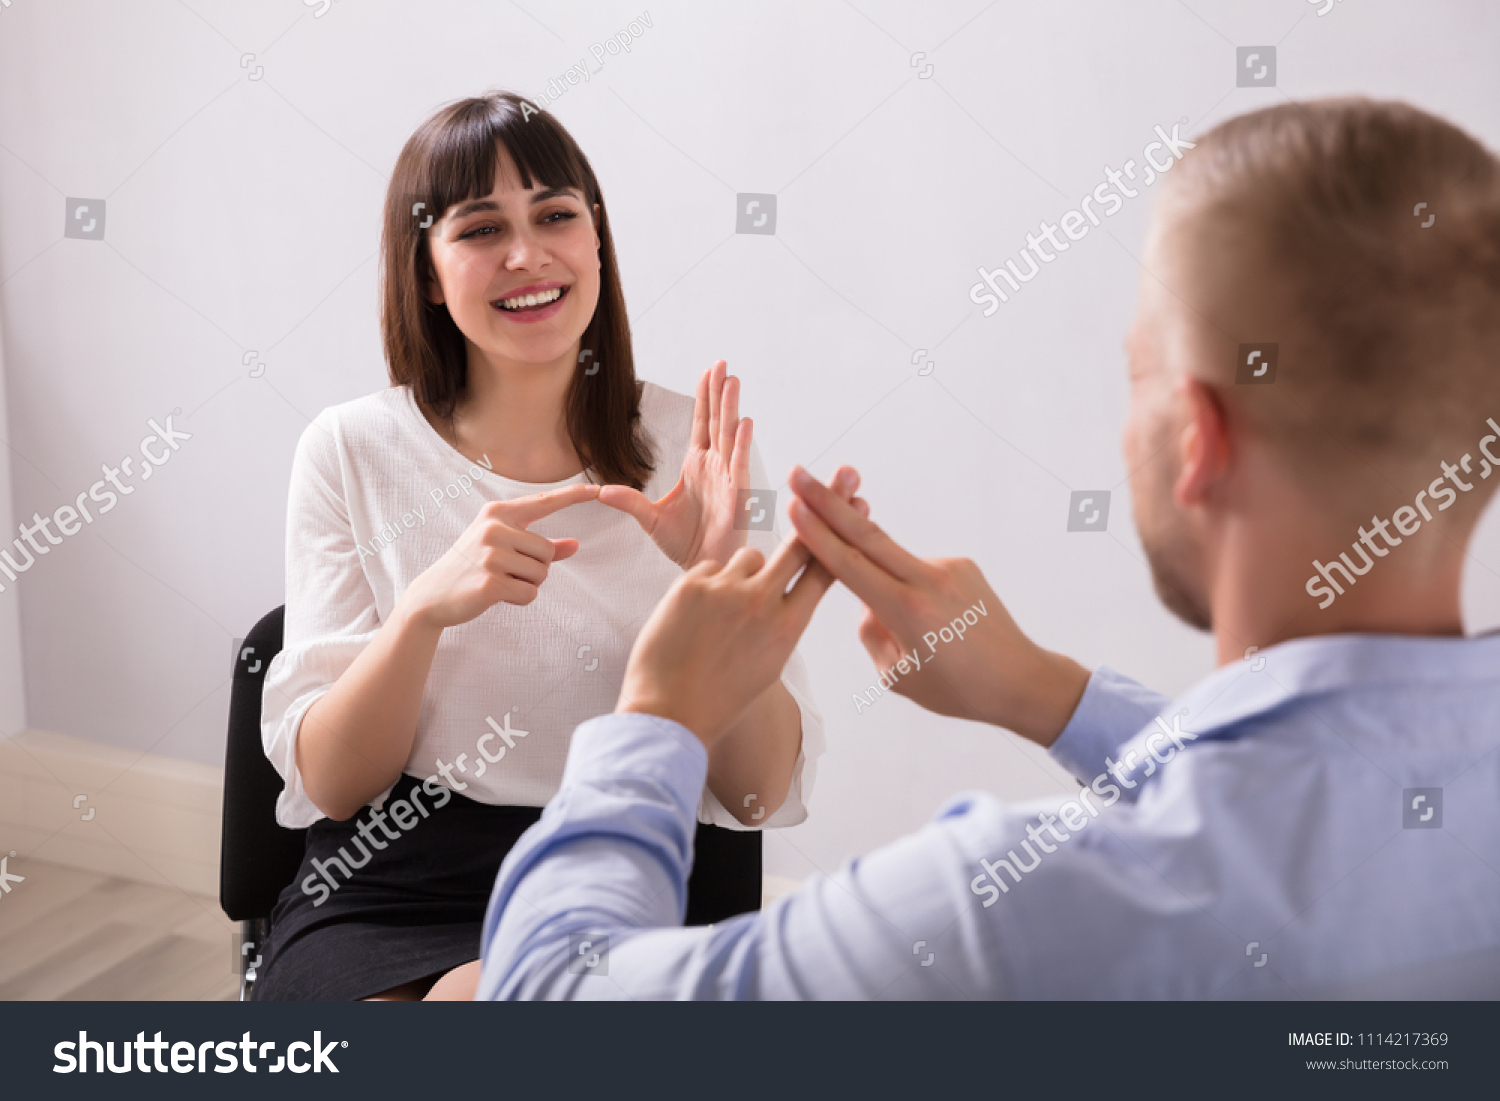 Smiling Young Woman And Man Talking With Sign Language On White Background #1114217369